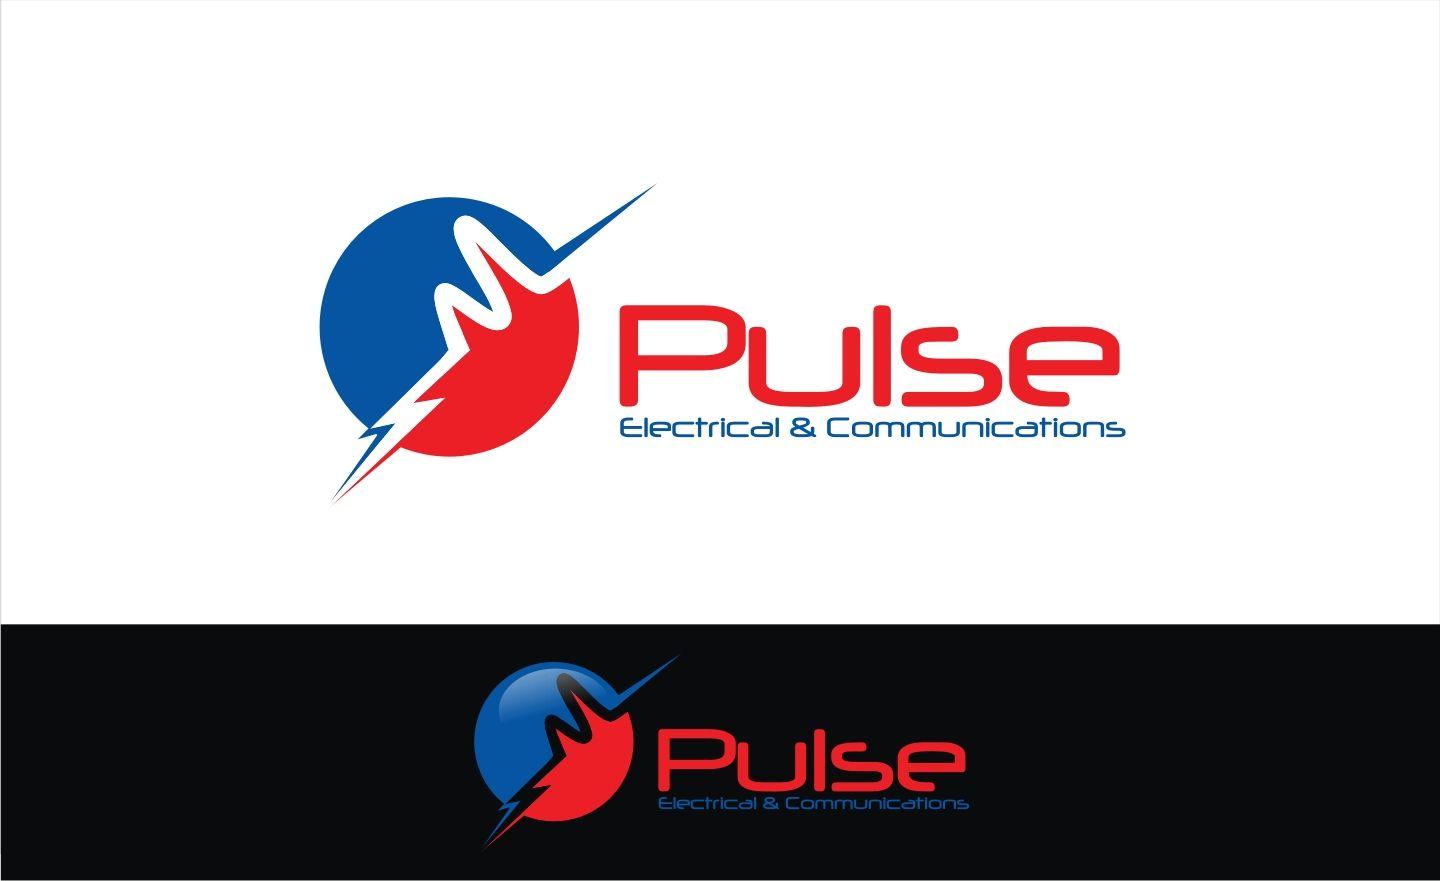 Communication Company Logo - Professional, Serious, Electrical Logo Design for Pulse Electrical ...